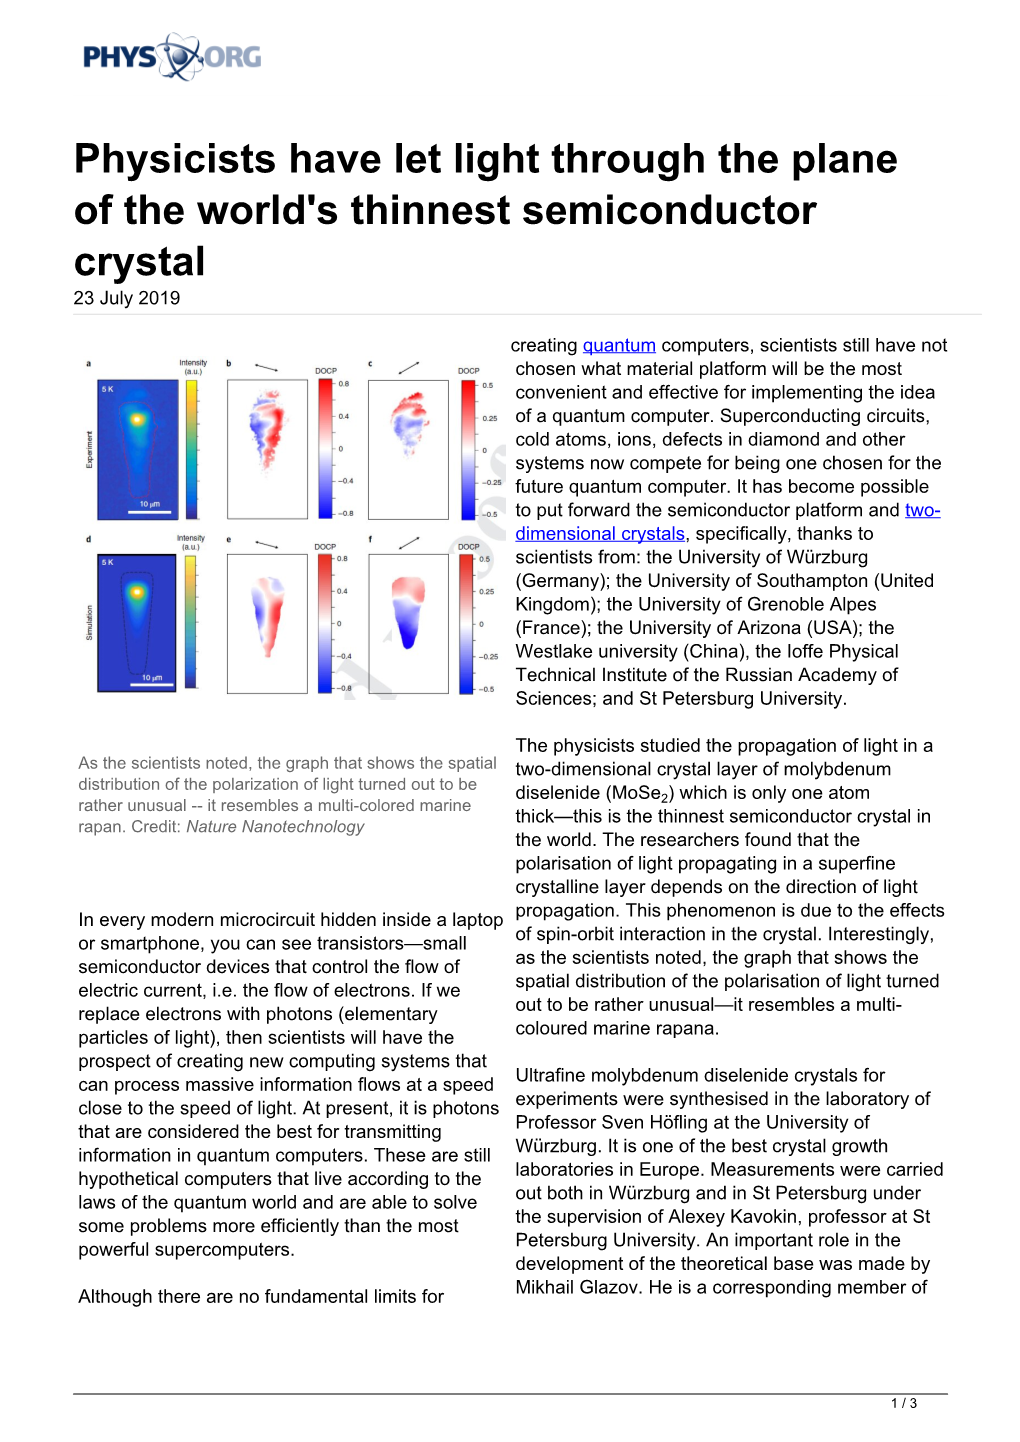 Physicists Have Let Light Through the Plane of the World's Thinnest Semiconductor Crystal 23 July 2019